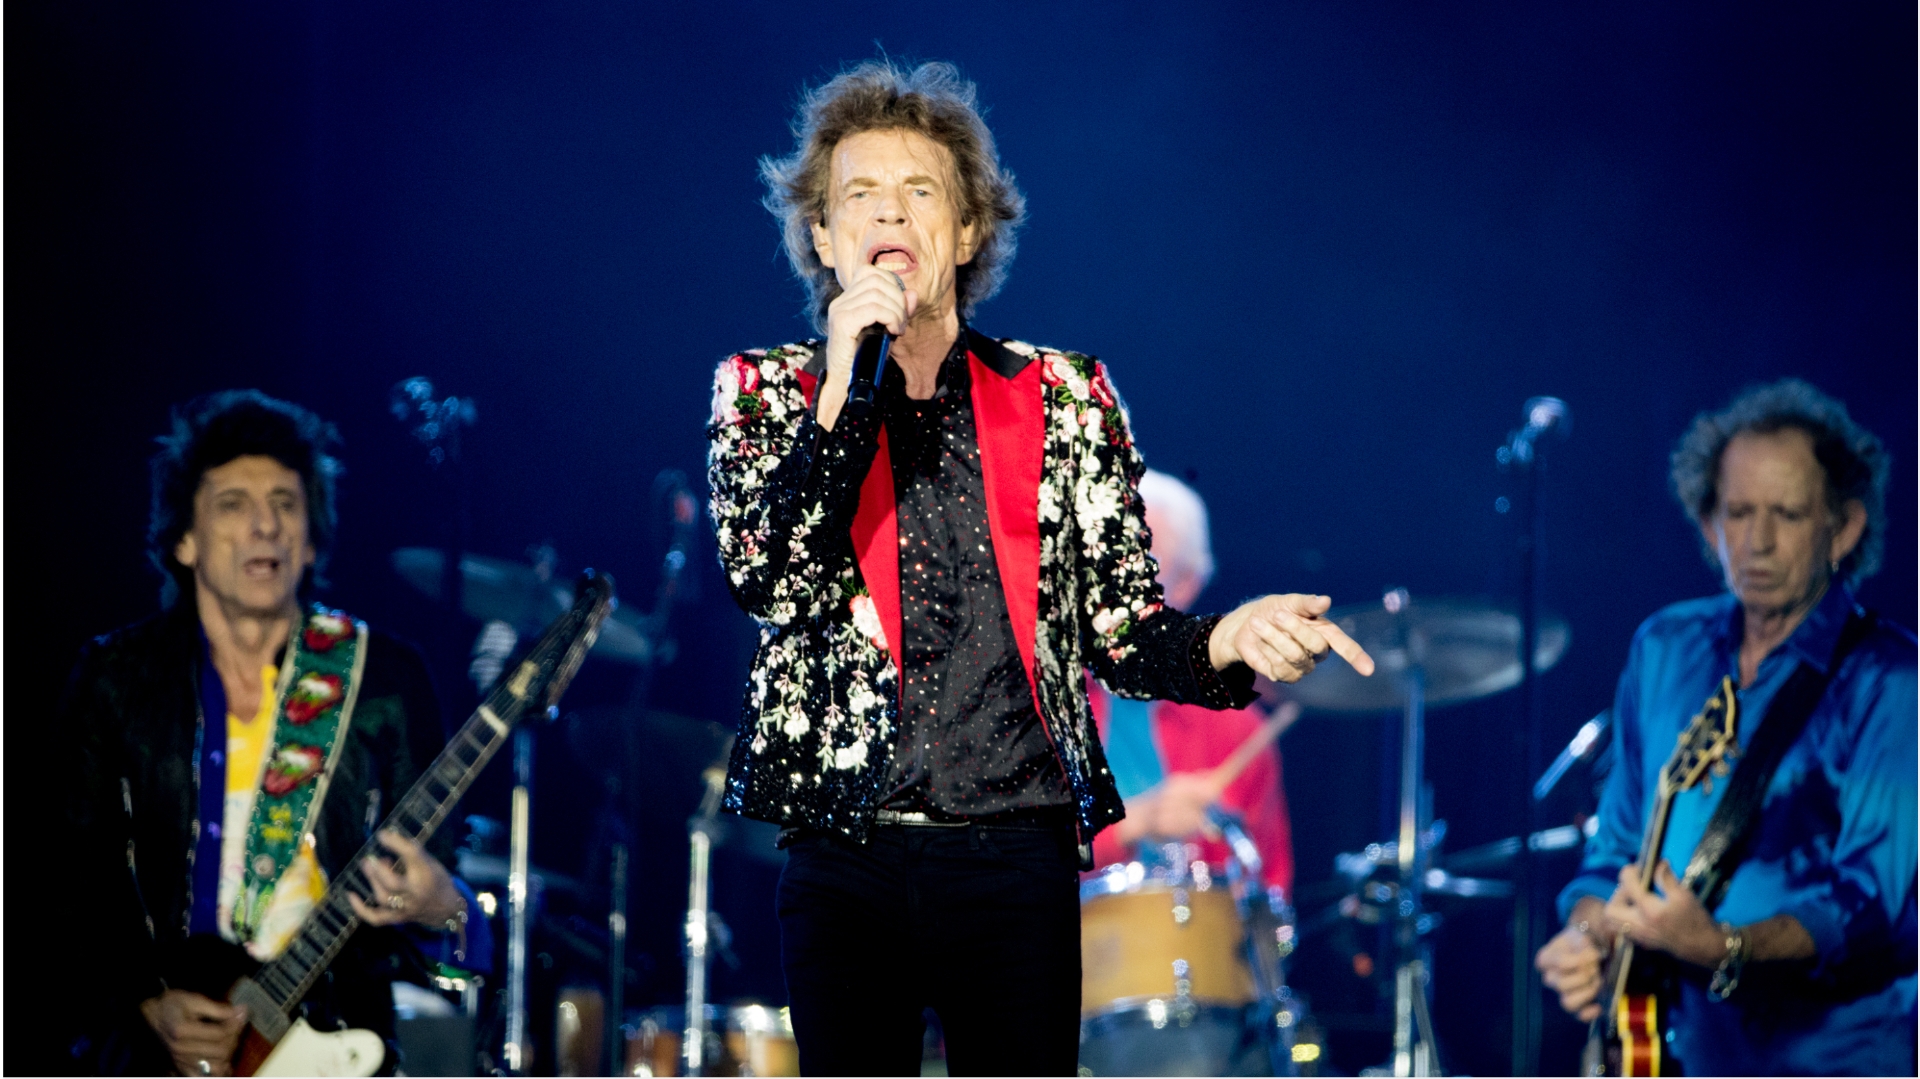 Rolling Stones tour will be back in action Tuesday in Milan, per Mick Jagger